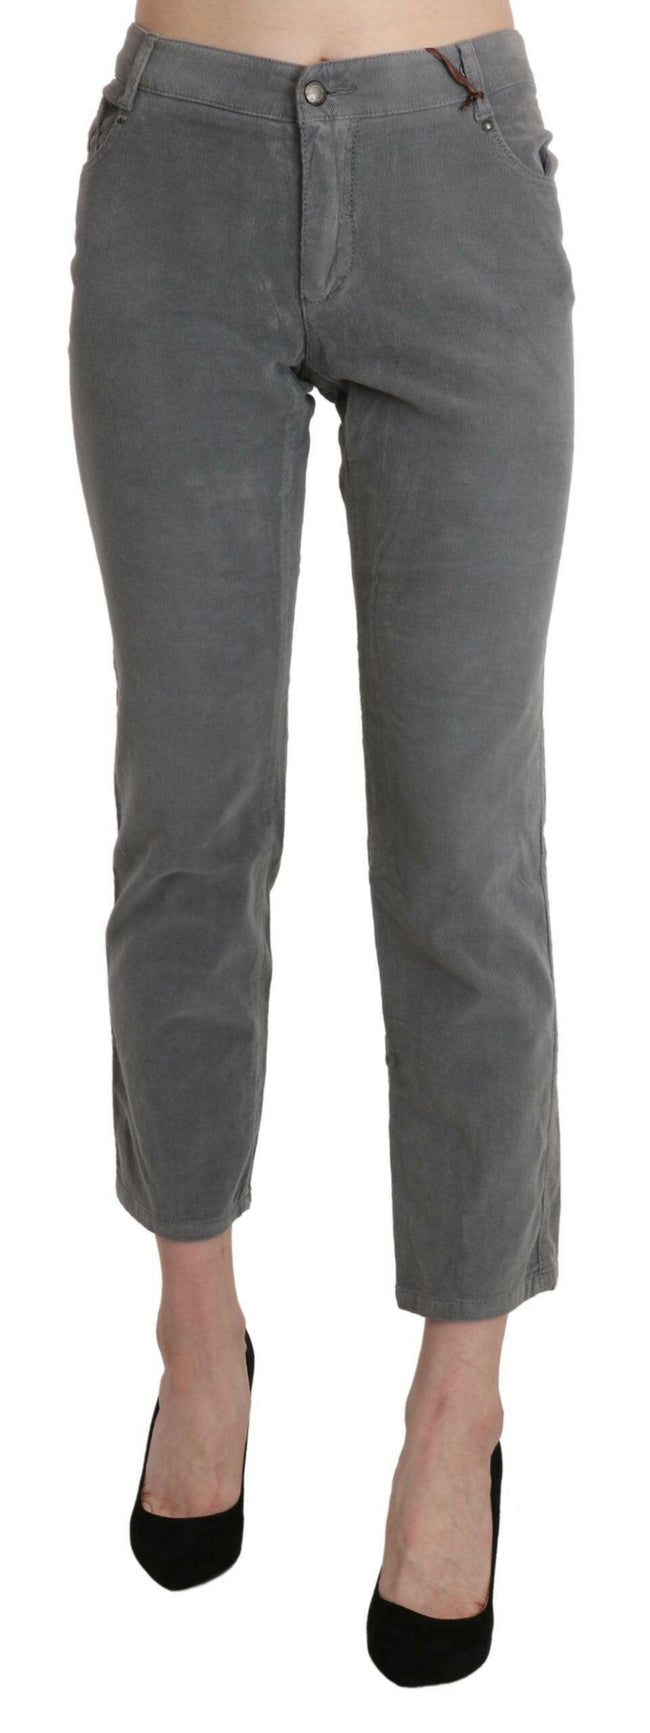 Ermanno Scervino Gray Cropped Cotton Stretch Trouser Pants - GENUINE AUTHENTIC BRAND LLC  